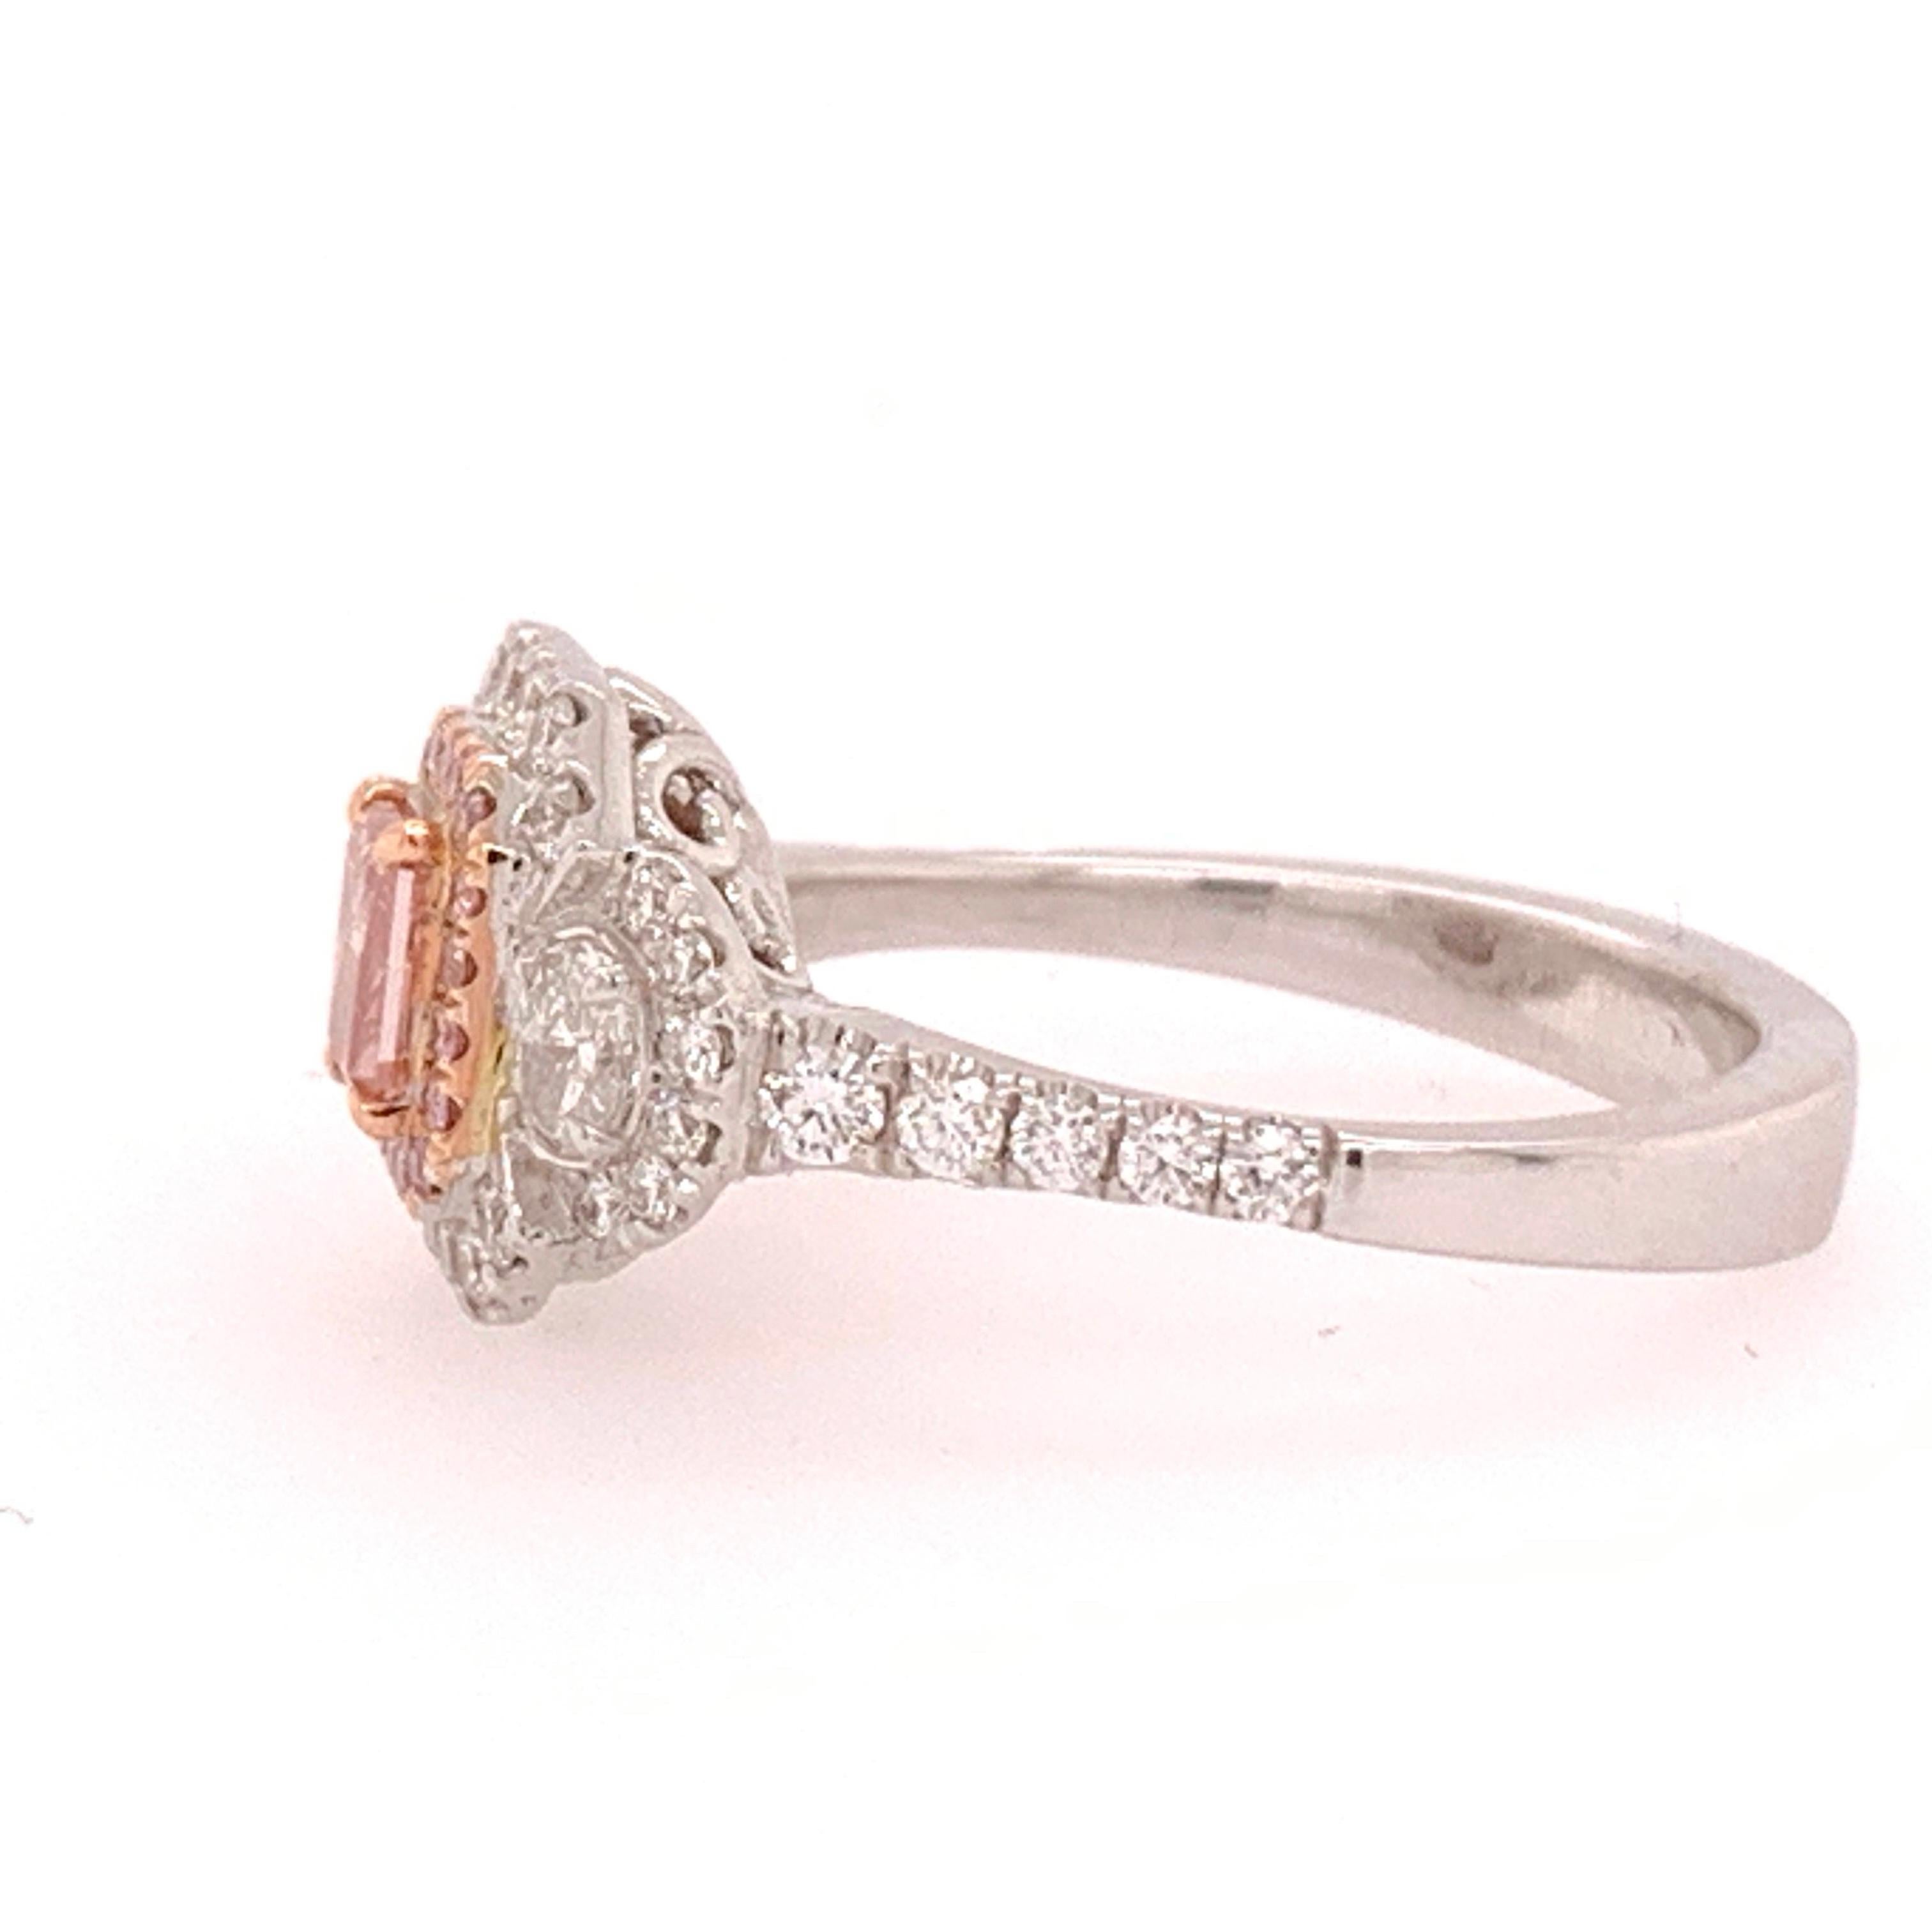 Radiant Cut 0.40 Carat GIA Natural Fancy Orangy Pink Diamond Cocktail Ring (Radiantschliff)